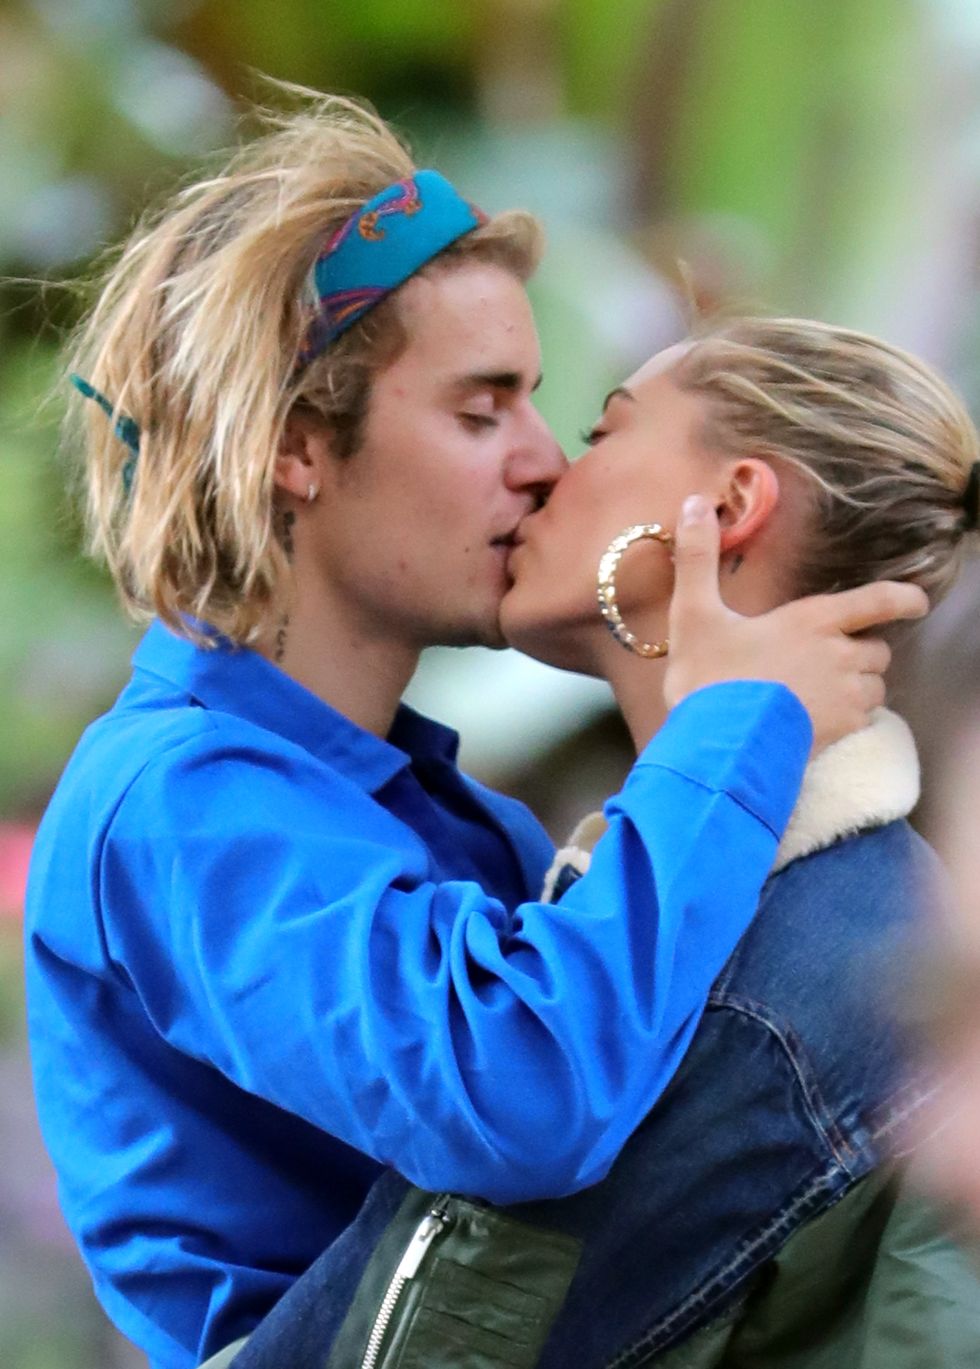 Justin Bieber Locks Lips With Wife Hailey During Date Night, 'We're Cute